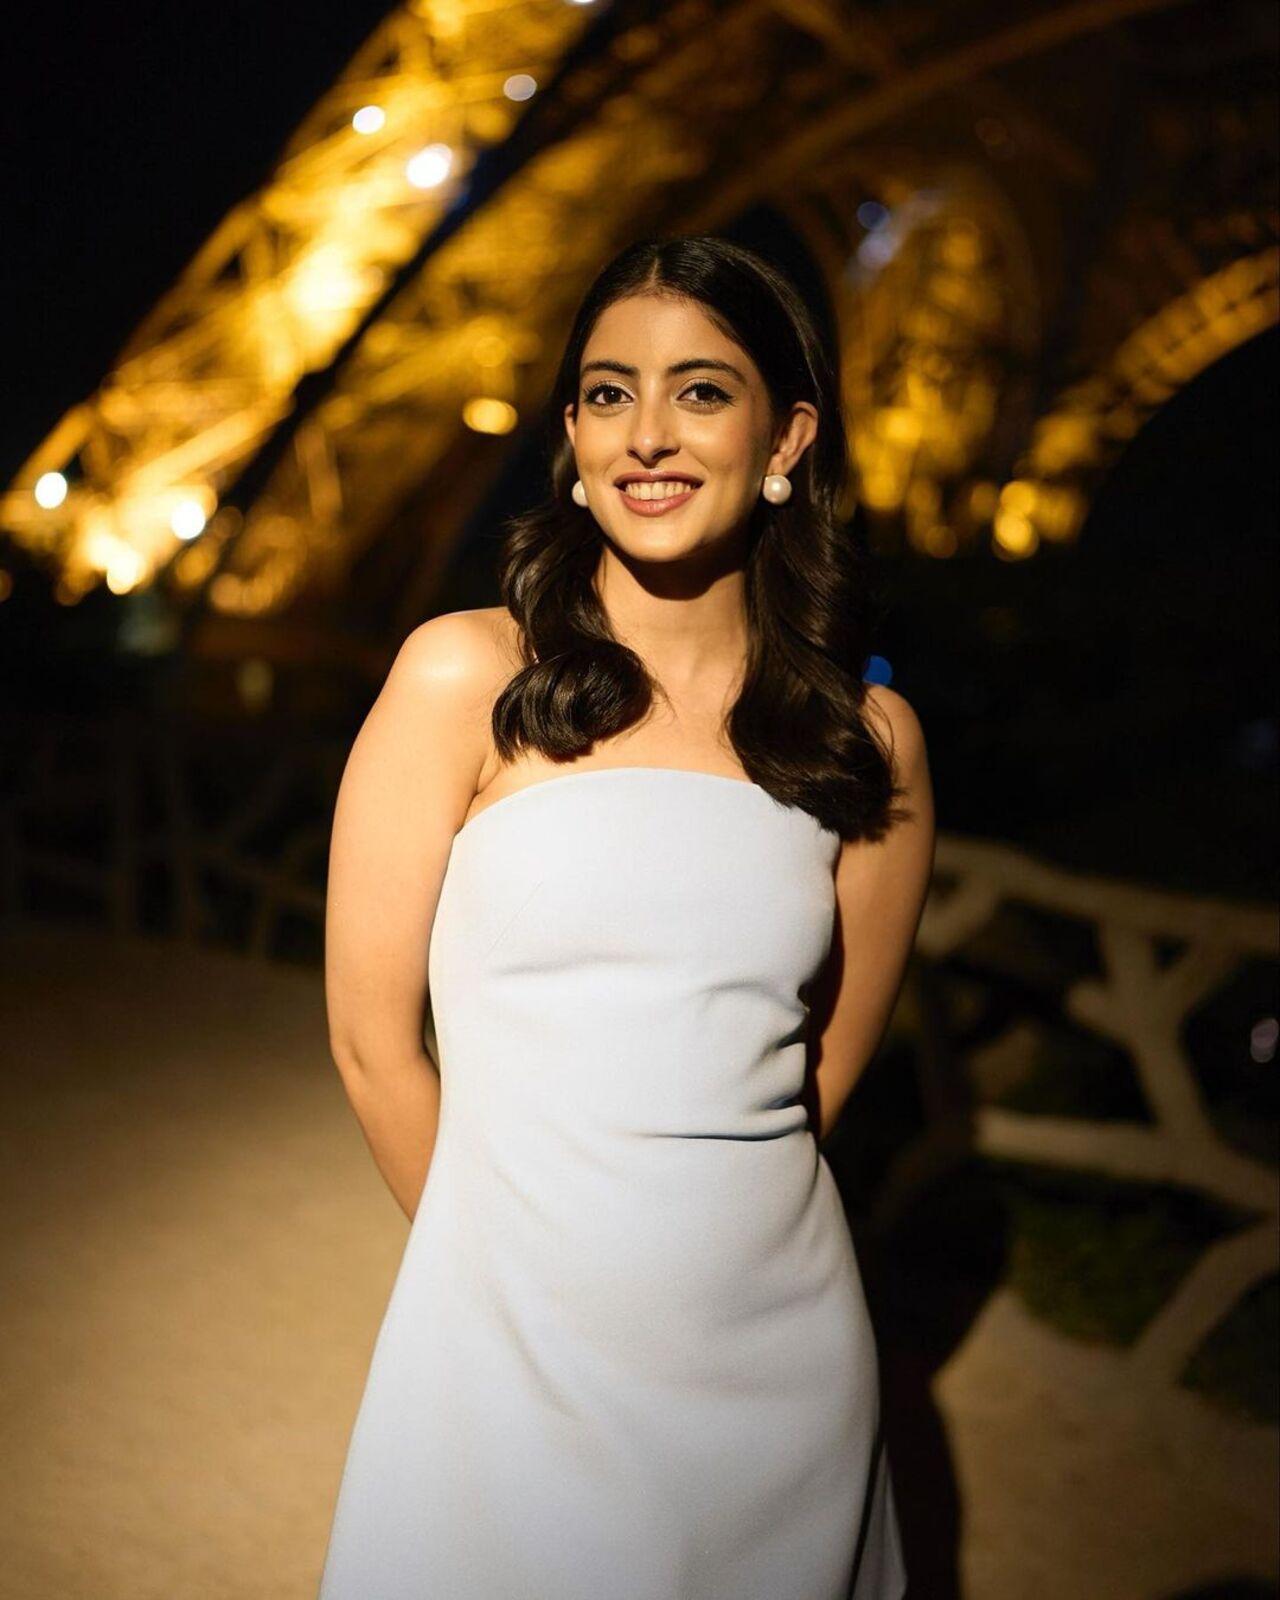 Navya also took to her Instagram feed to share pictures from her time in Paris for L'Oreal